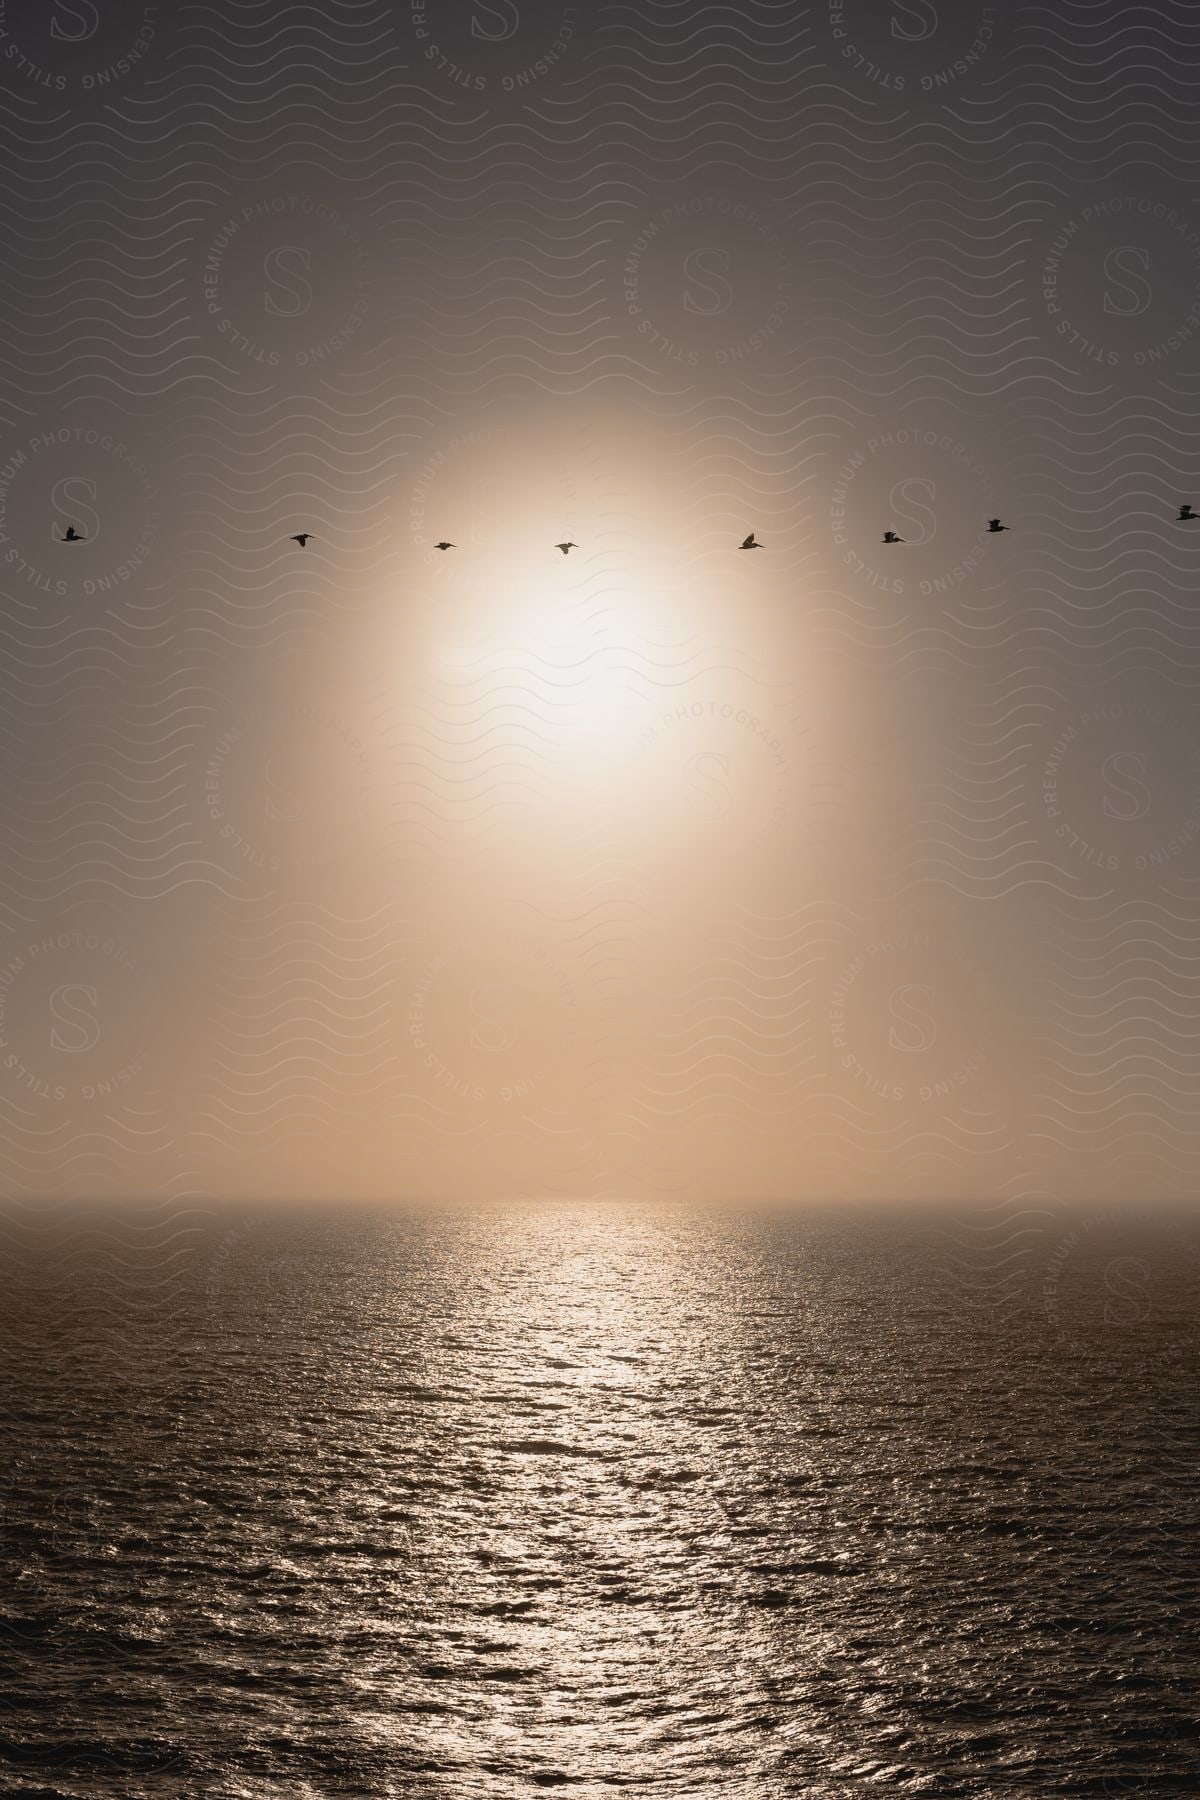 Stock photo of a group of birds flying over calm water during sunset